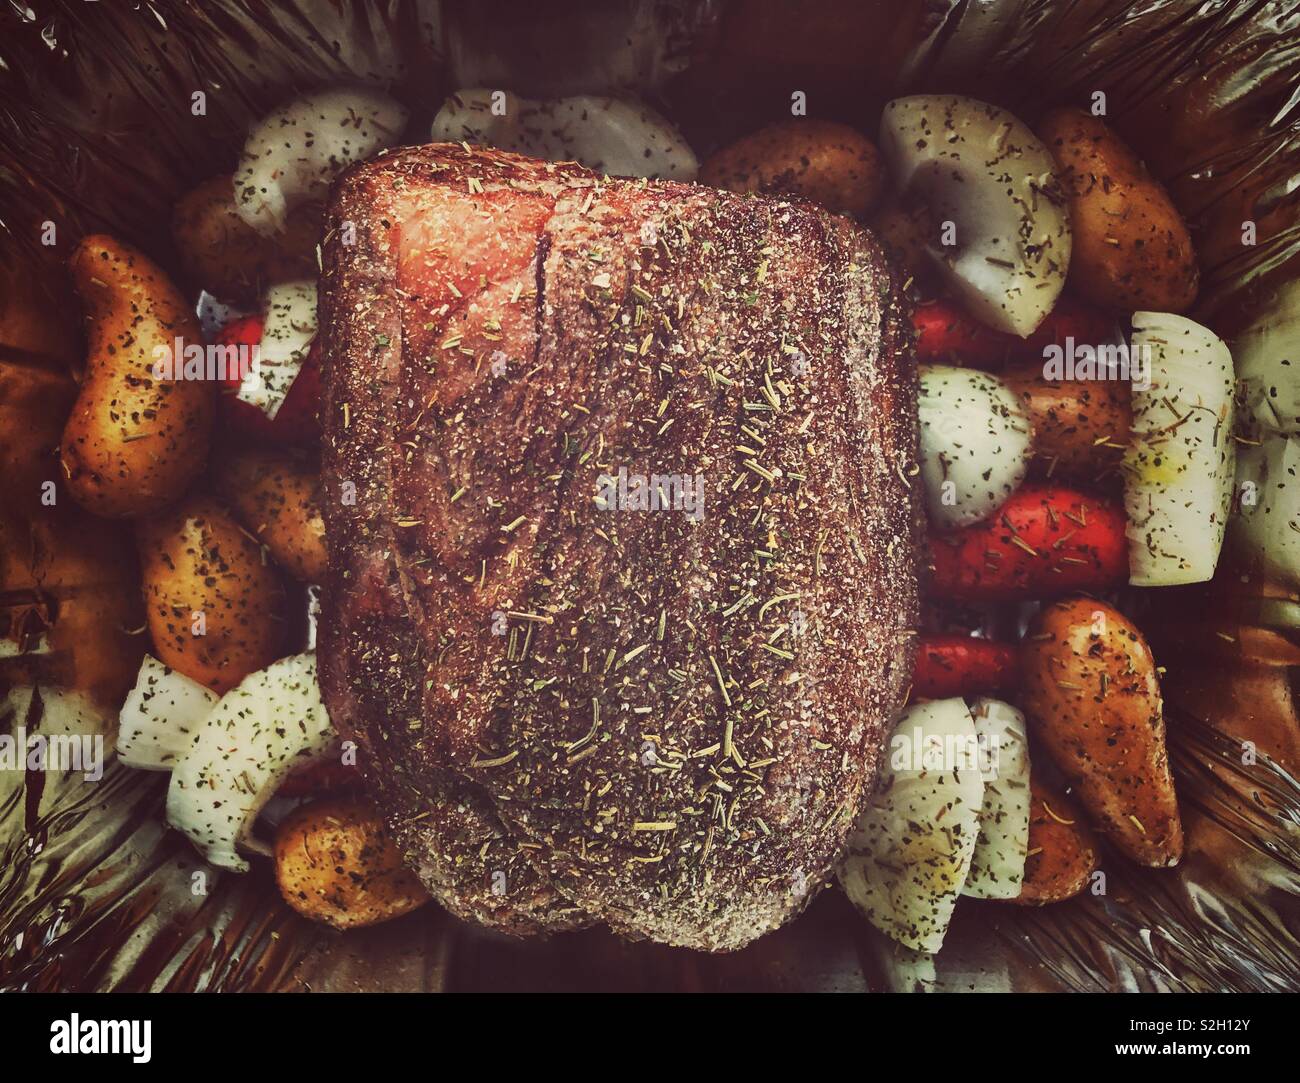 Raw, seared and seasoned roast beef with vegetables about to go in oven Stock Photo